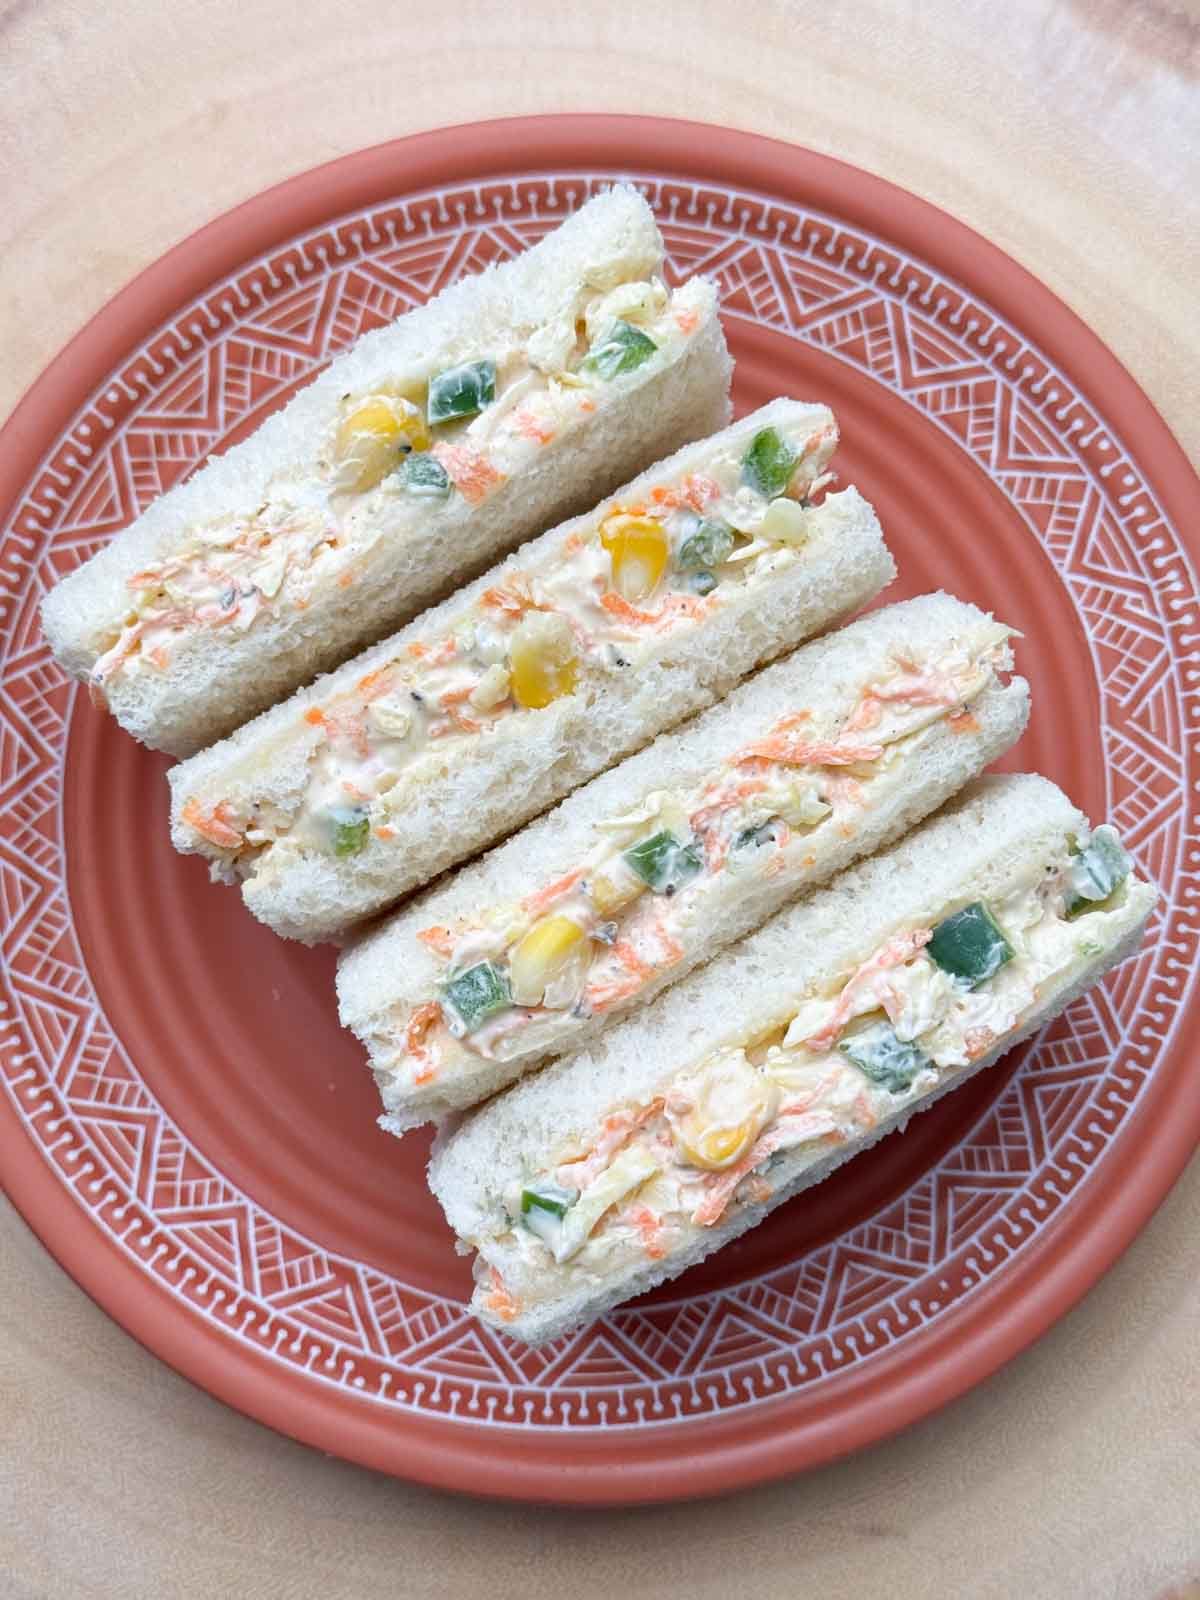 four slices of vegetable cream cheese sandwich in a plate